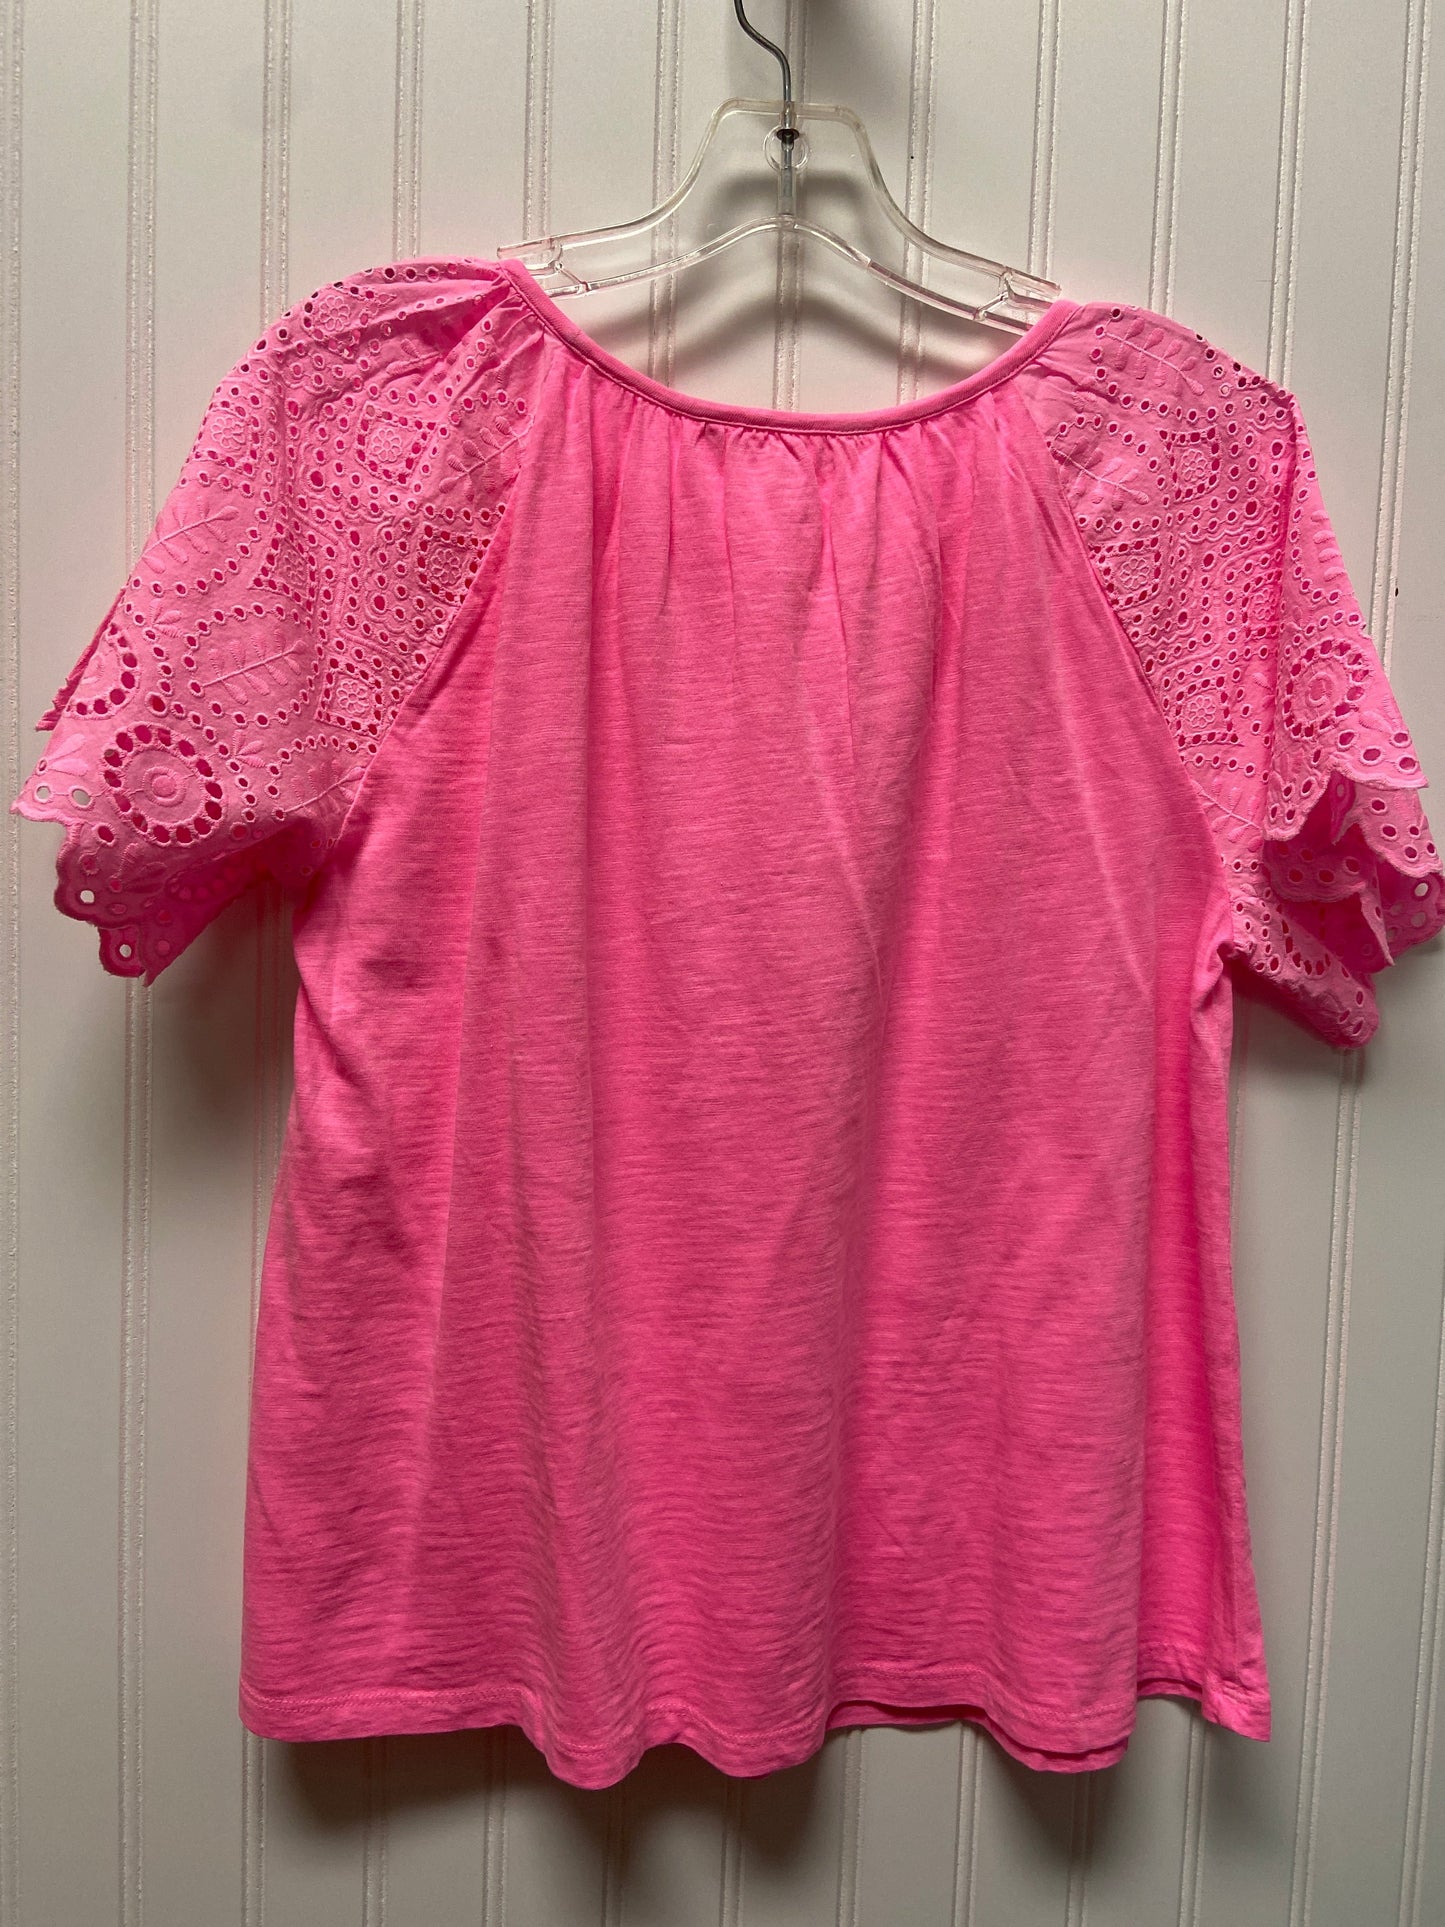 Pink Top Short Sleeve Designer Lilly Pulitzer, Size S